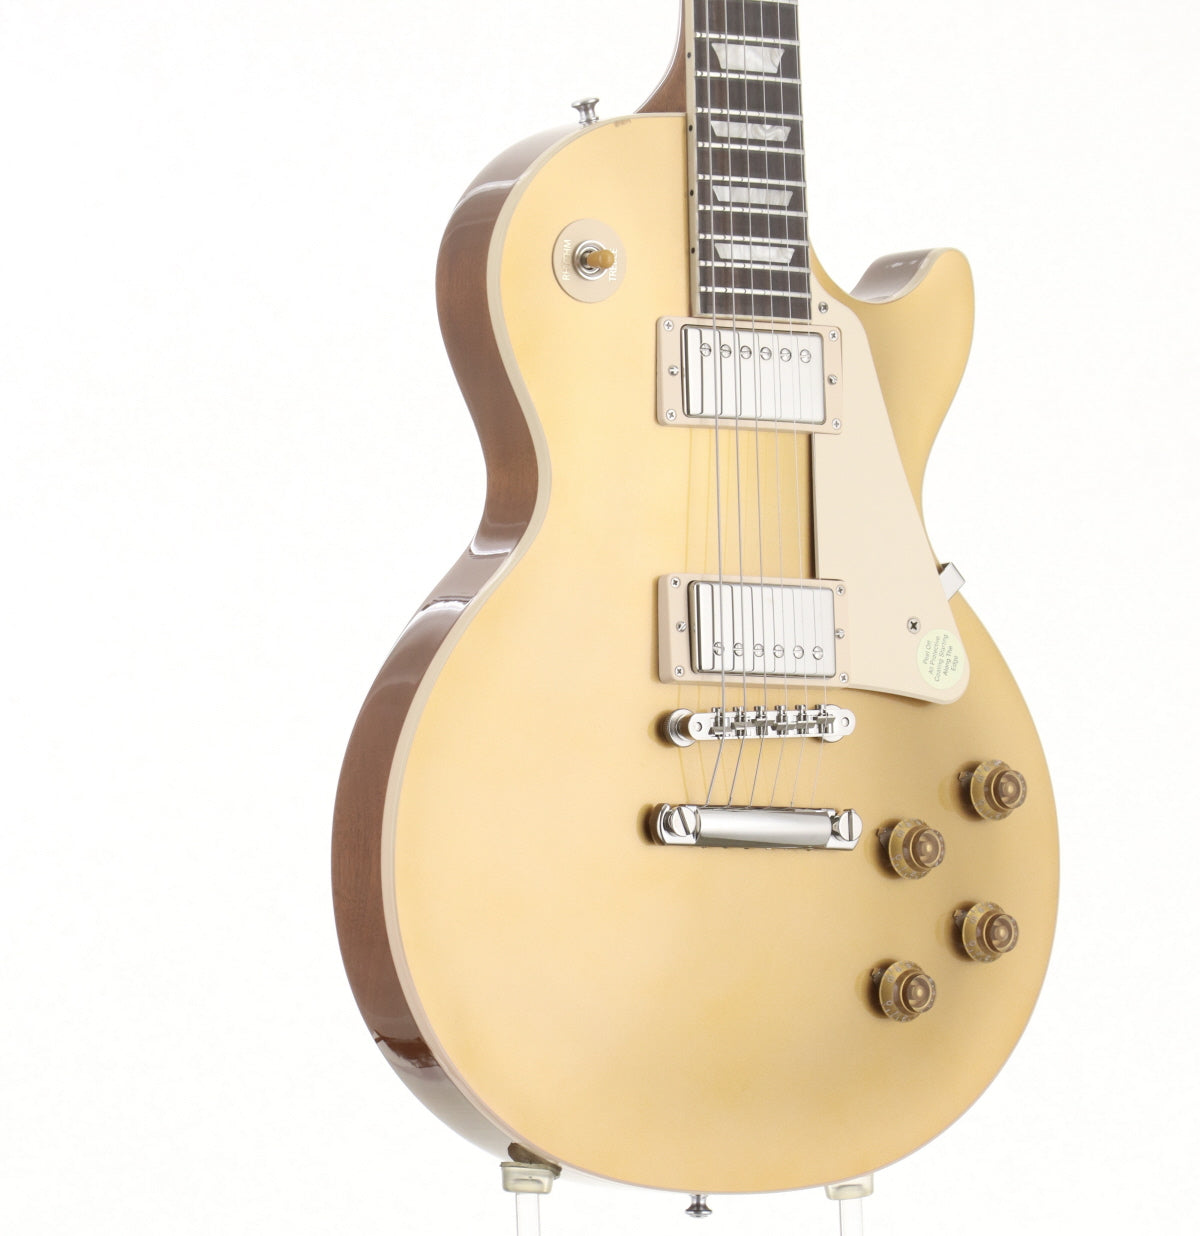 [SN 205600239] USED Gibson USA / Les Paul Standard 50s Gold Top [03]